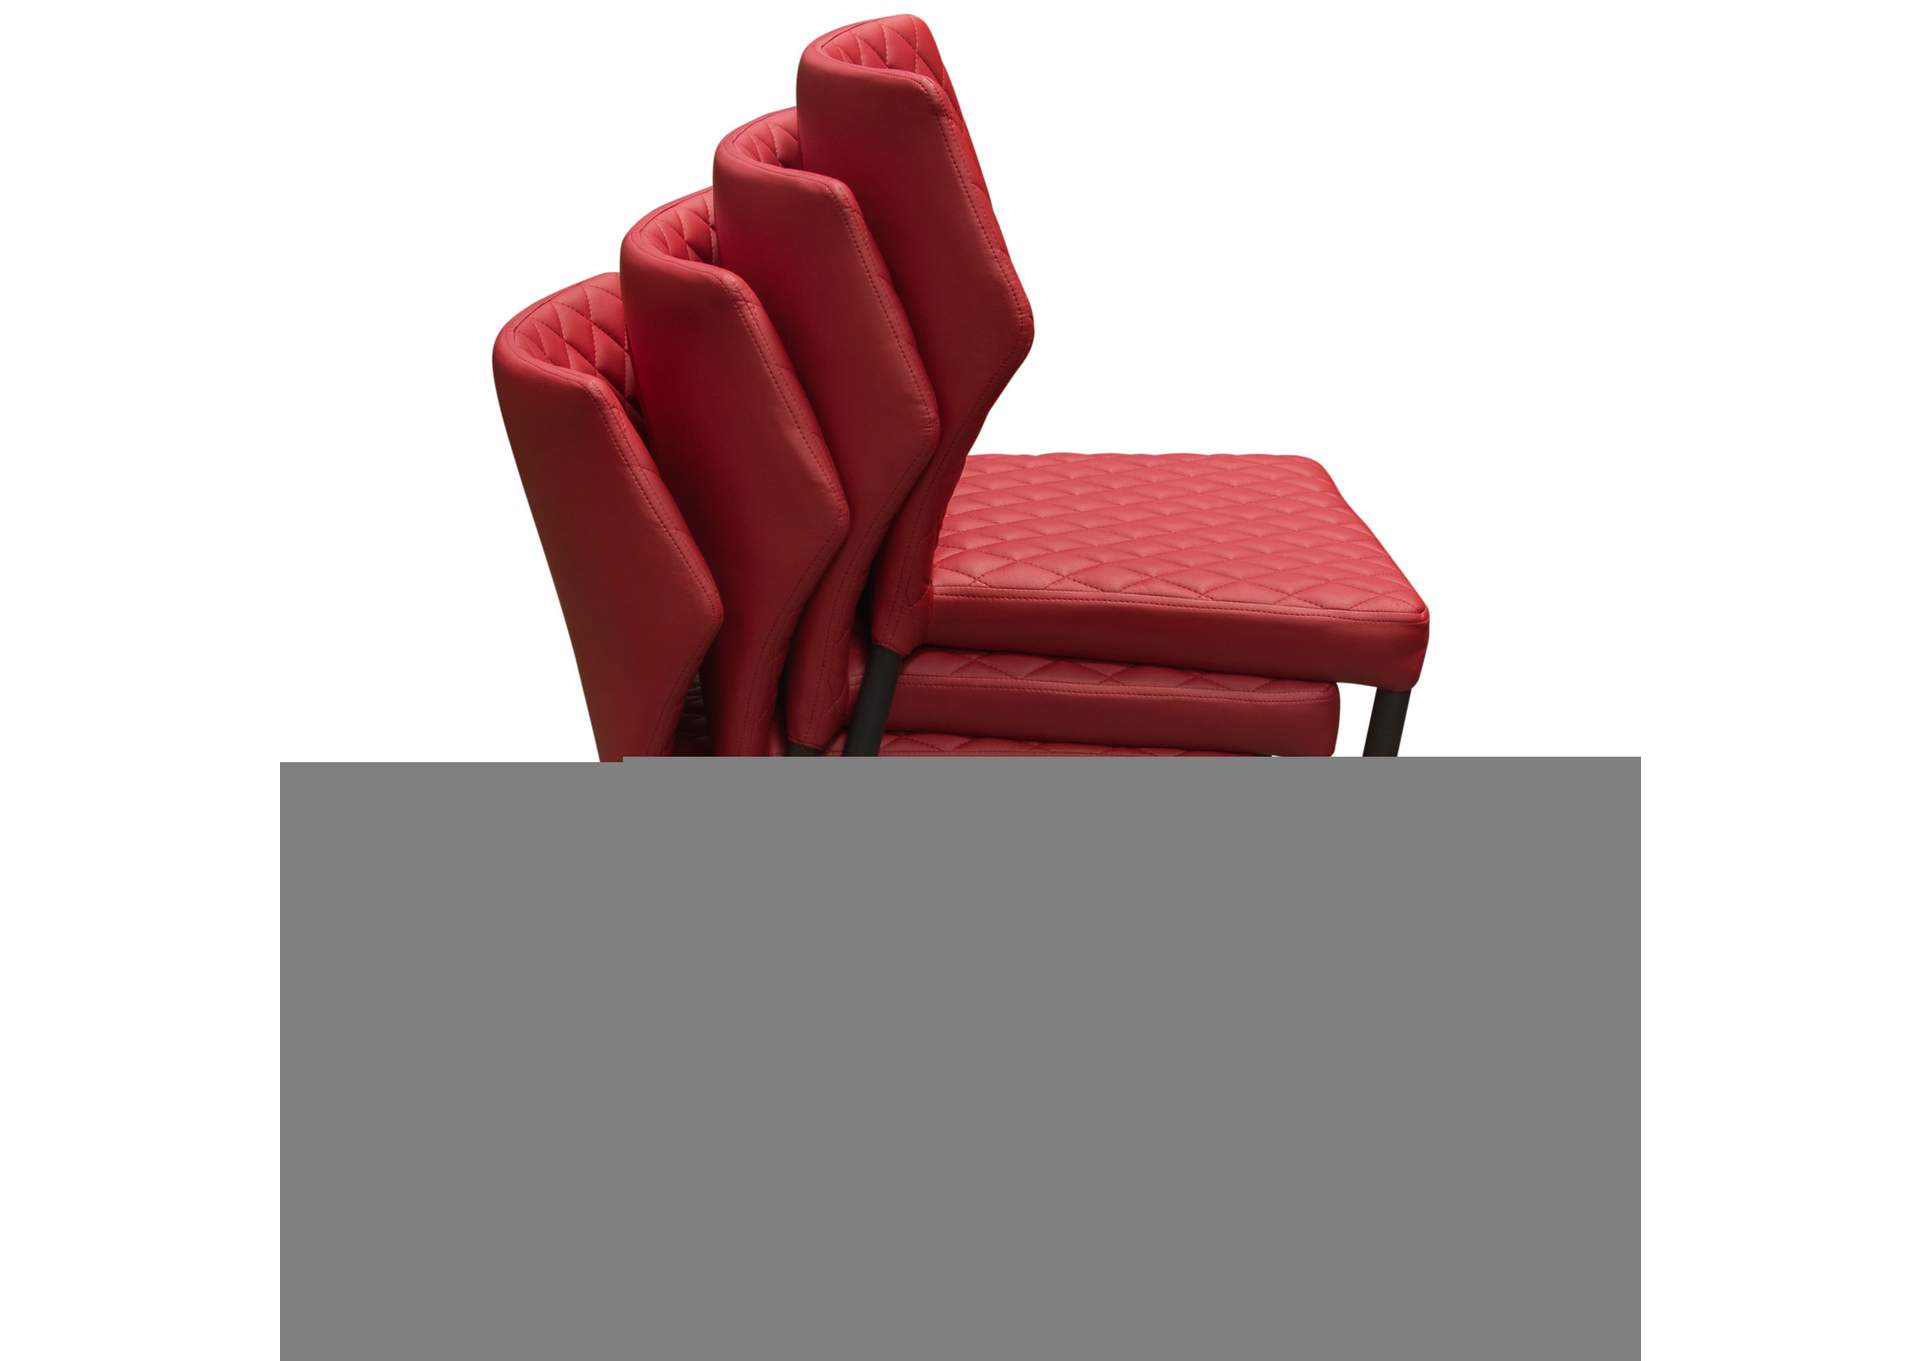 Milo 4-Pack Dining Chairs in Red Diamond Tufted Leatherette with Black Powder Coat Legs by Diamond Sofa,Diamond Sofa